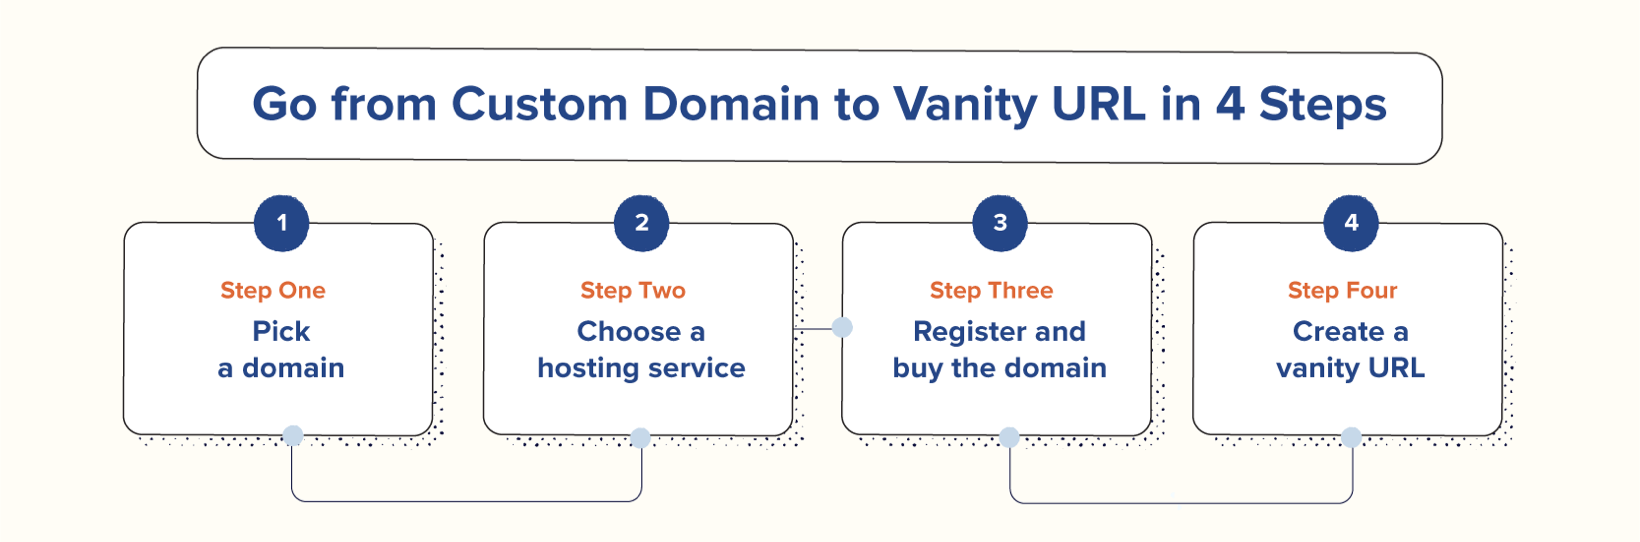 4 steps to go from Custom Domain to Vanity URL